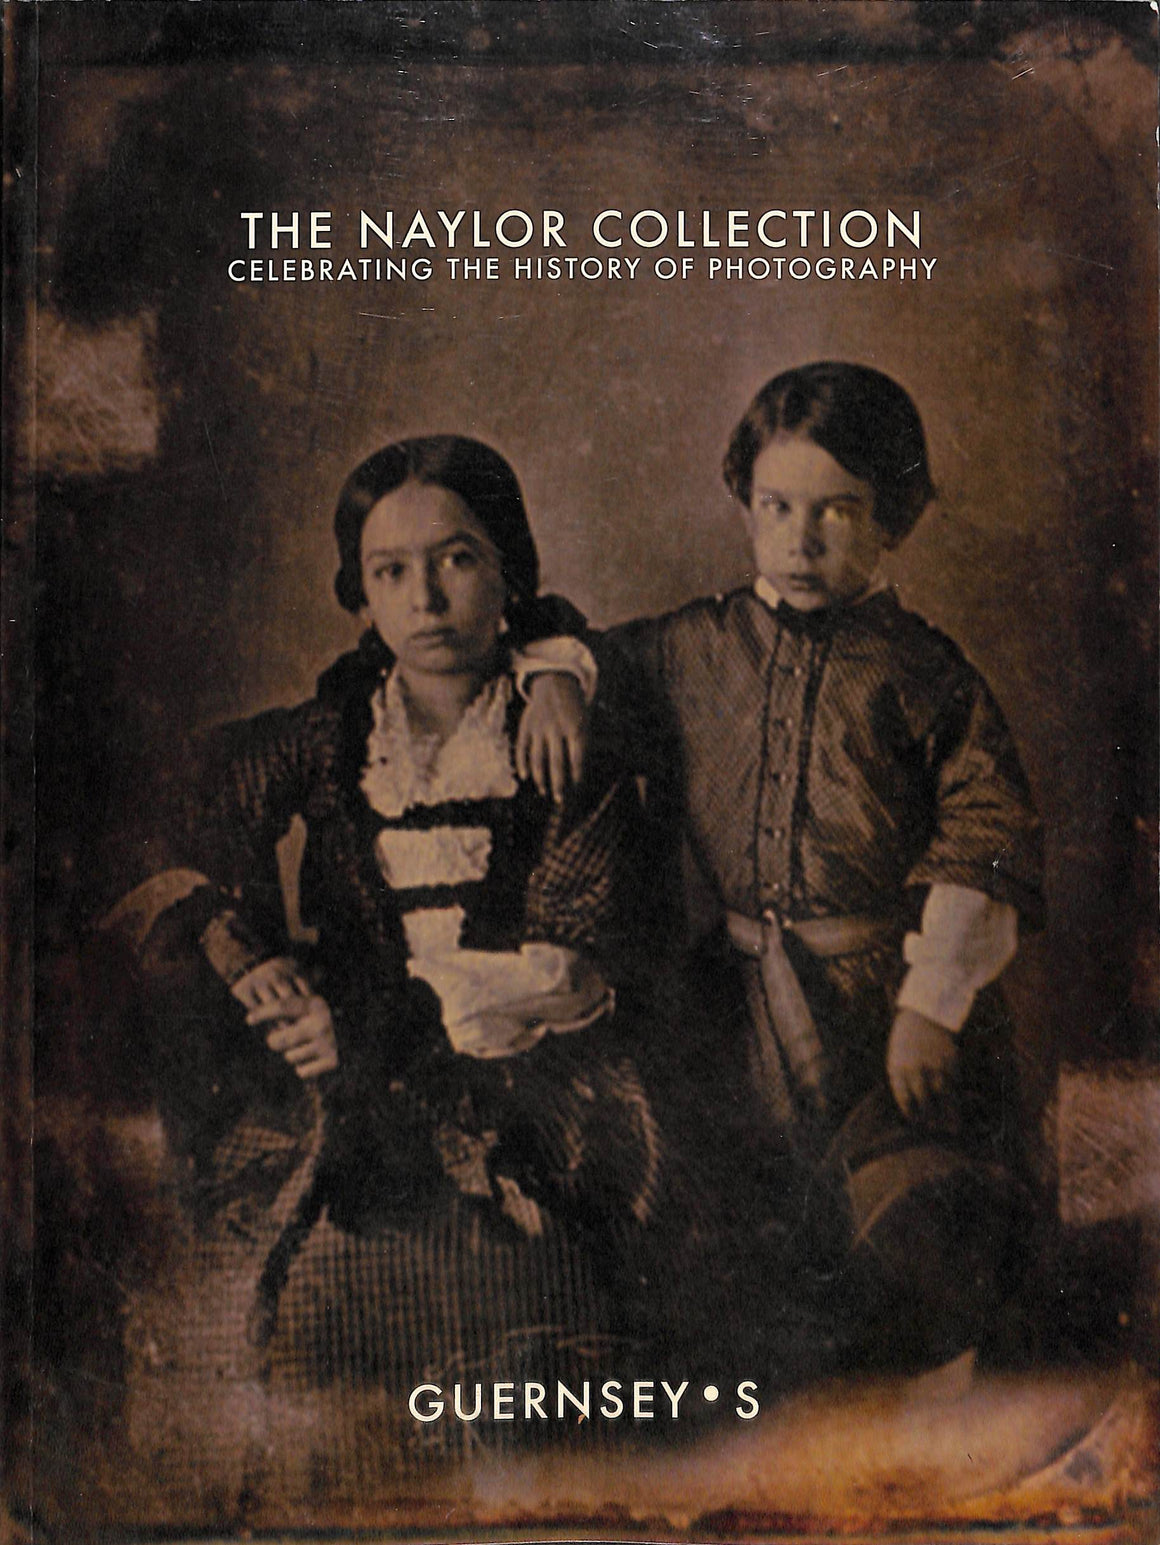 "The Naylor Collection: Celebrating The History Of Photography" 2007